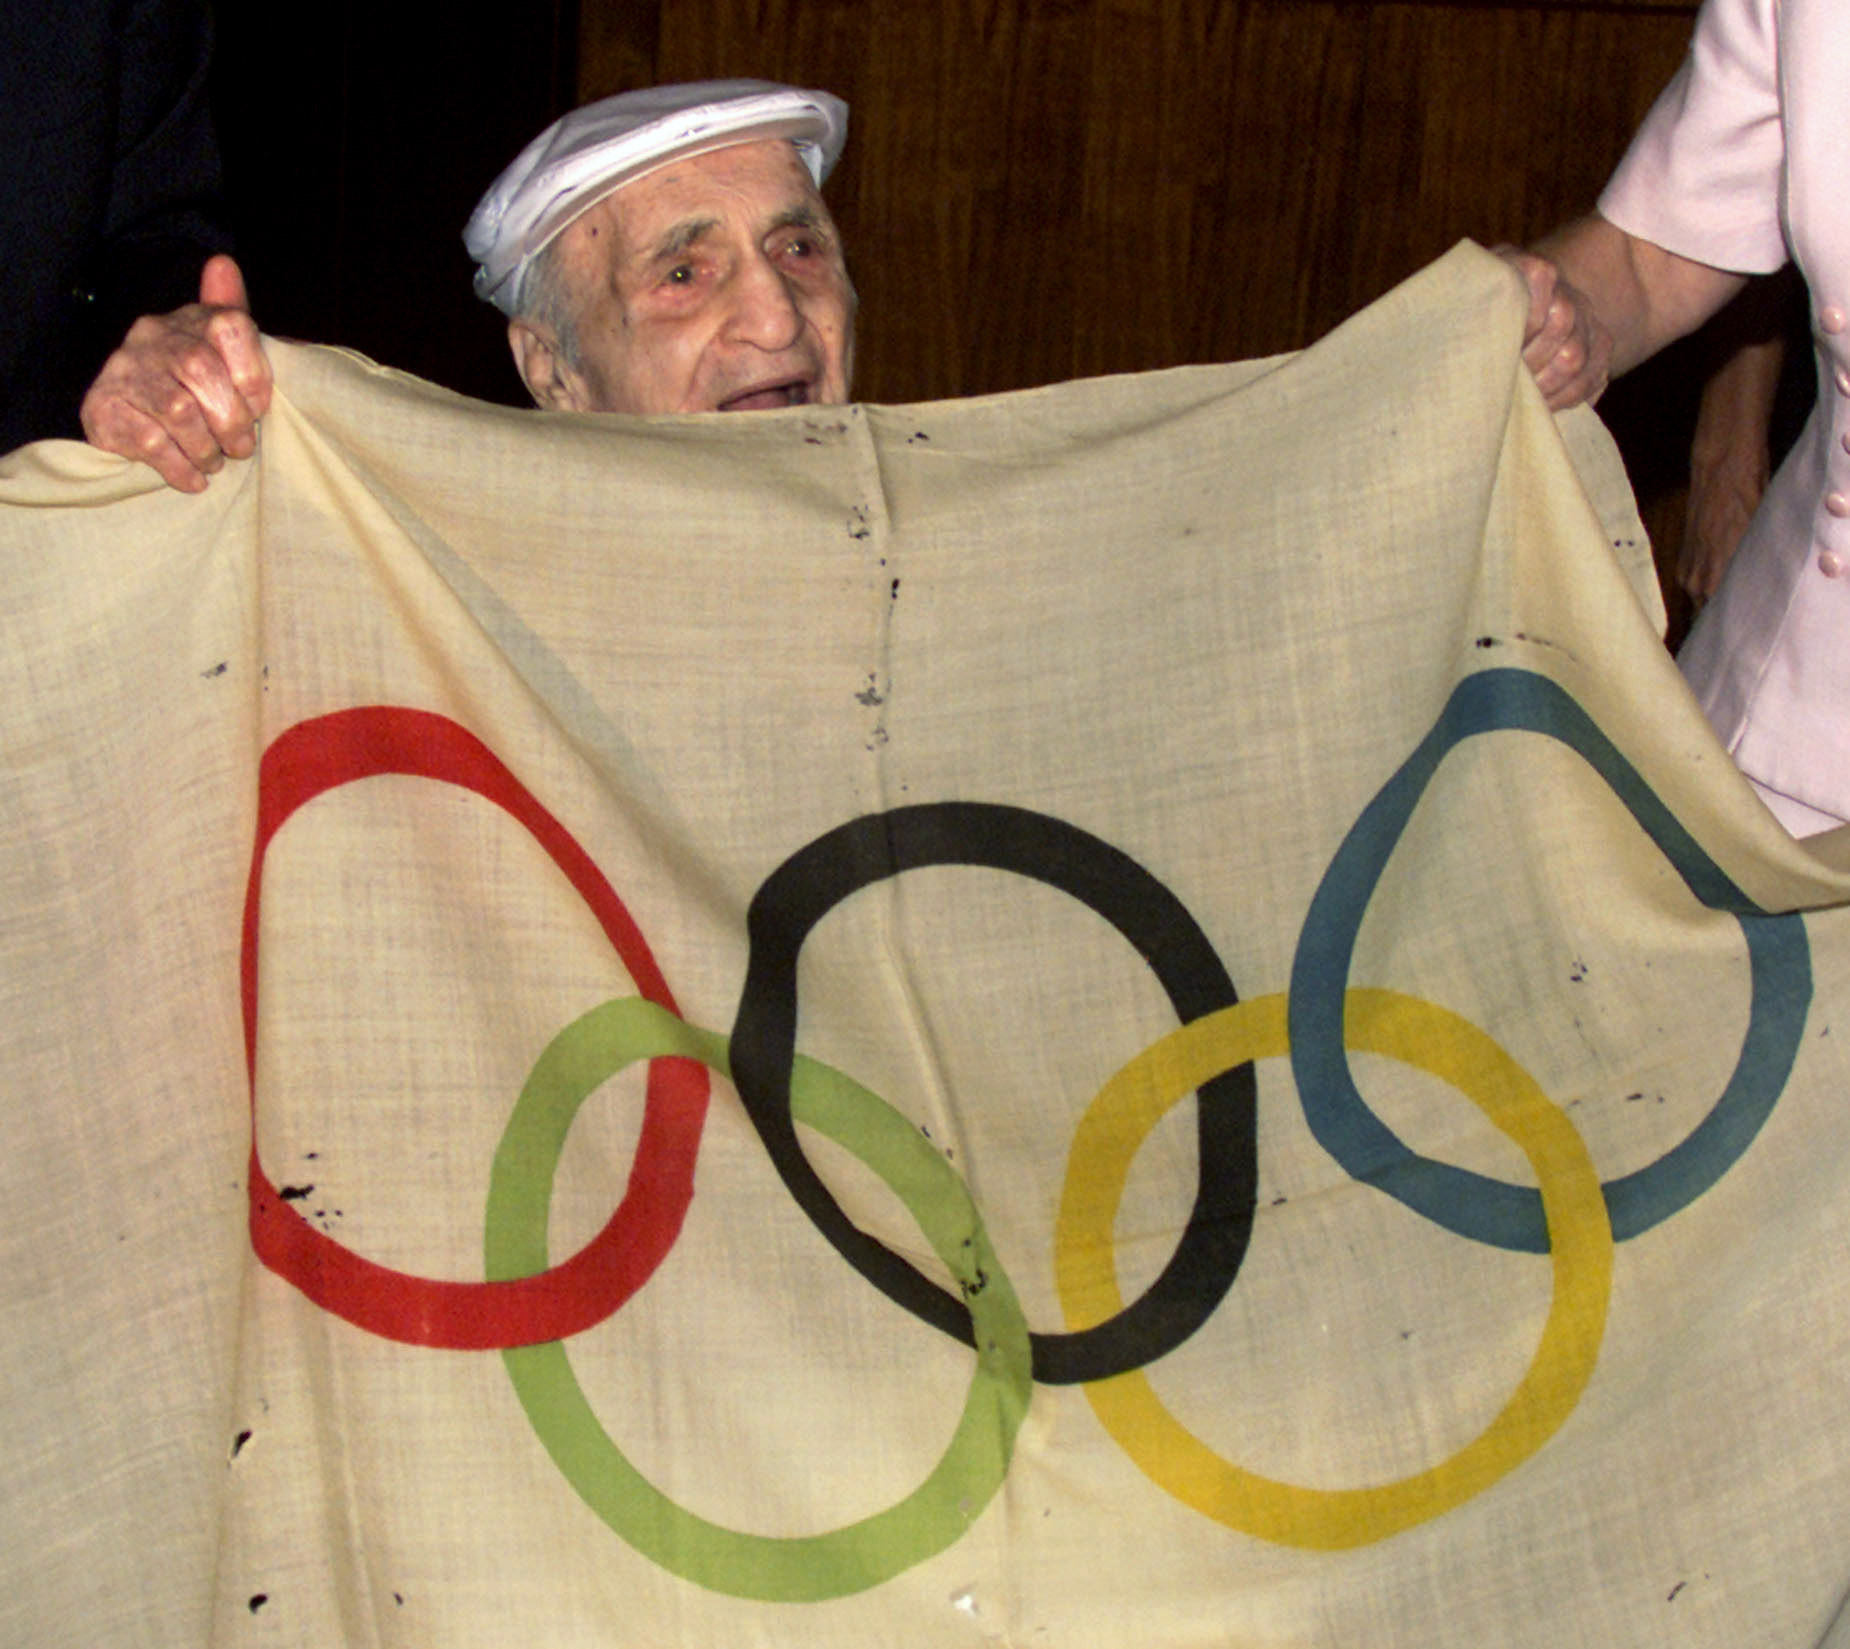 Hal Prieste, then 103, holds the original Olympic flag that he stole from a pole during the 1920 Olympics in Antwerp, where he won a bronze medal in diving. He handed it back to IOC President Juan Antonio Samaranch during the IOC Session in Sydney in 2000 ©Getty Images